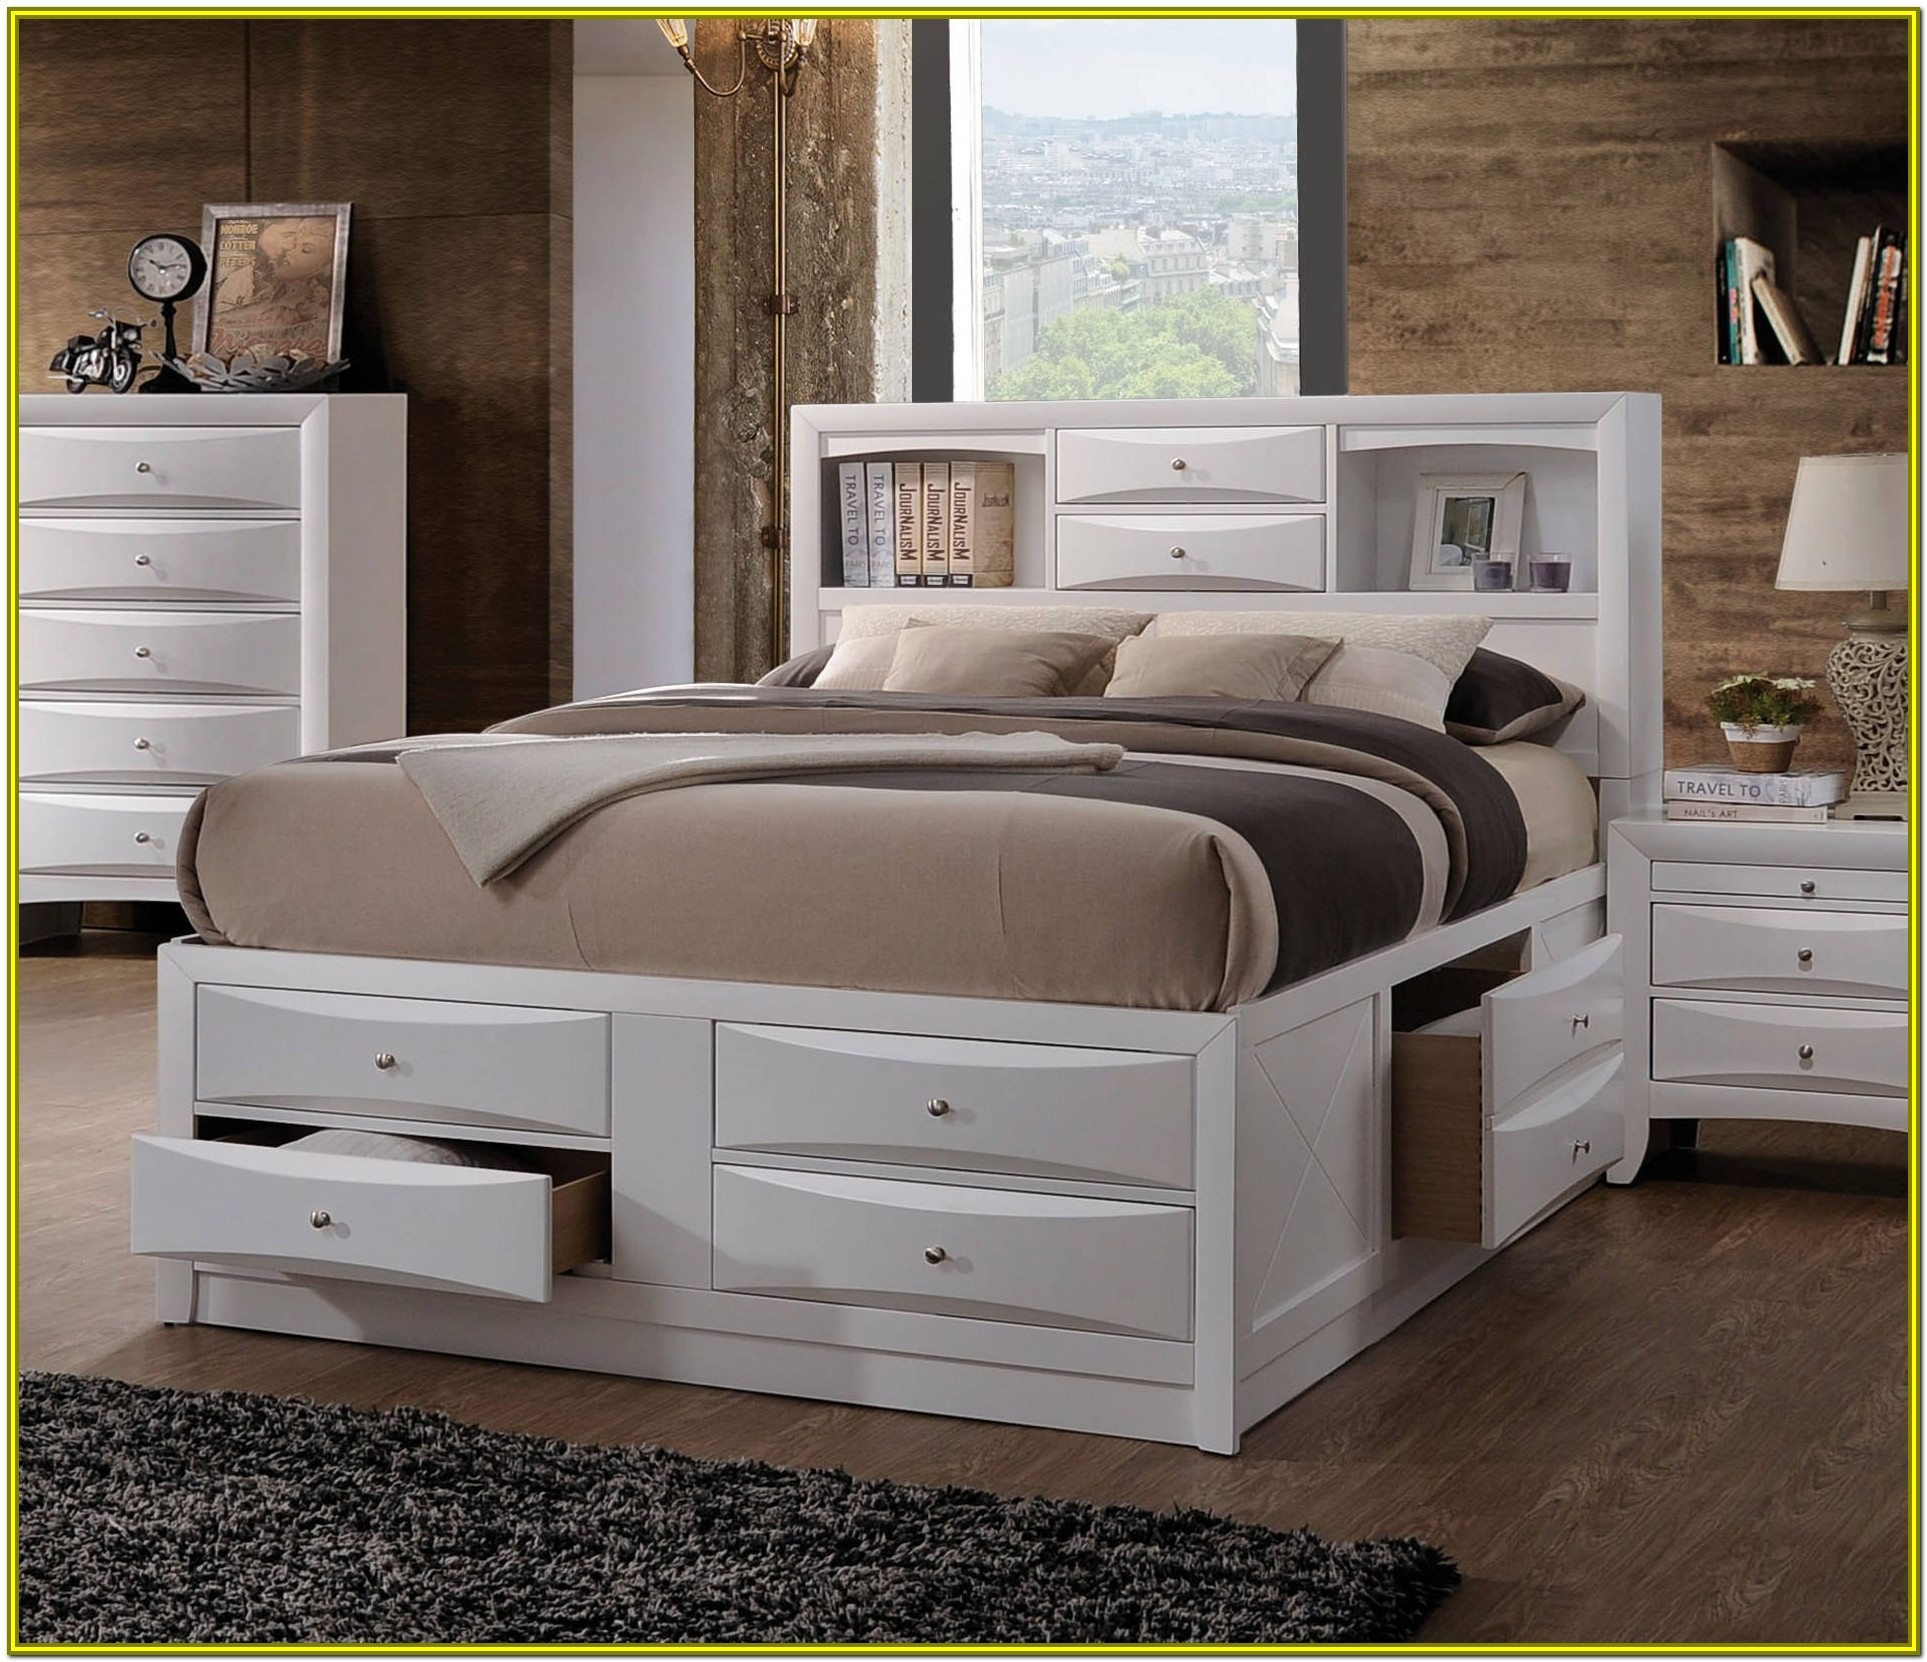 Platform Bed With Drawers Visualhunt, King Size Wood Platform Bed With Storage Drawers